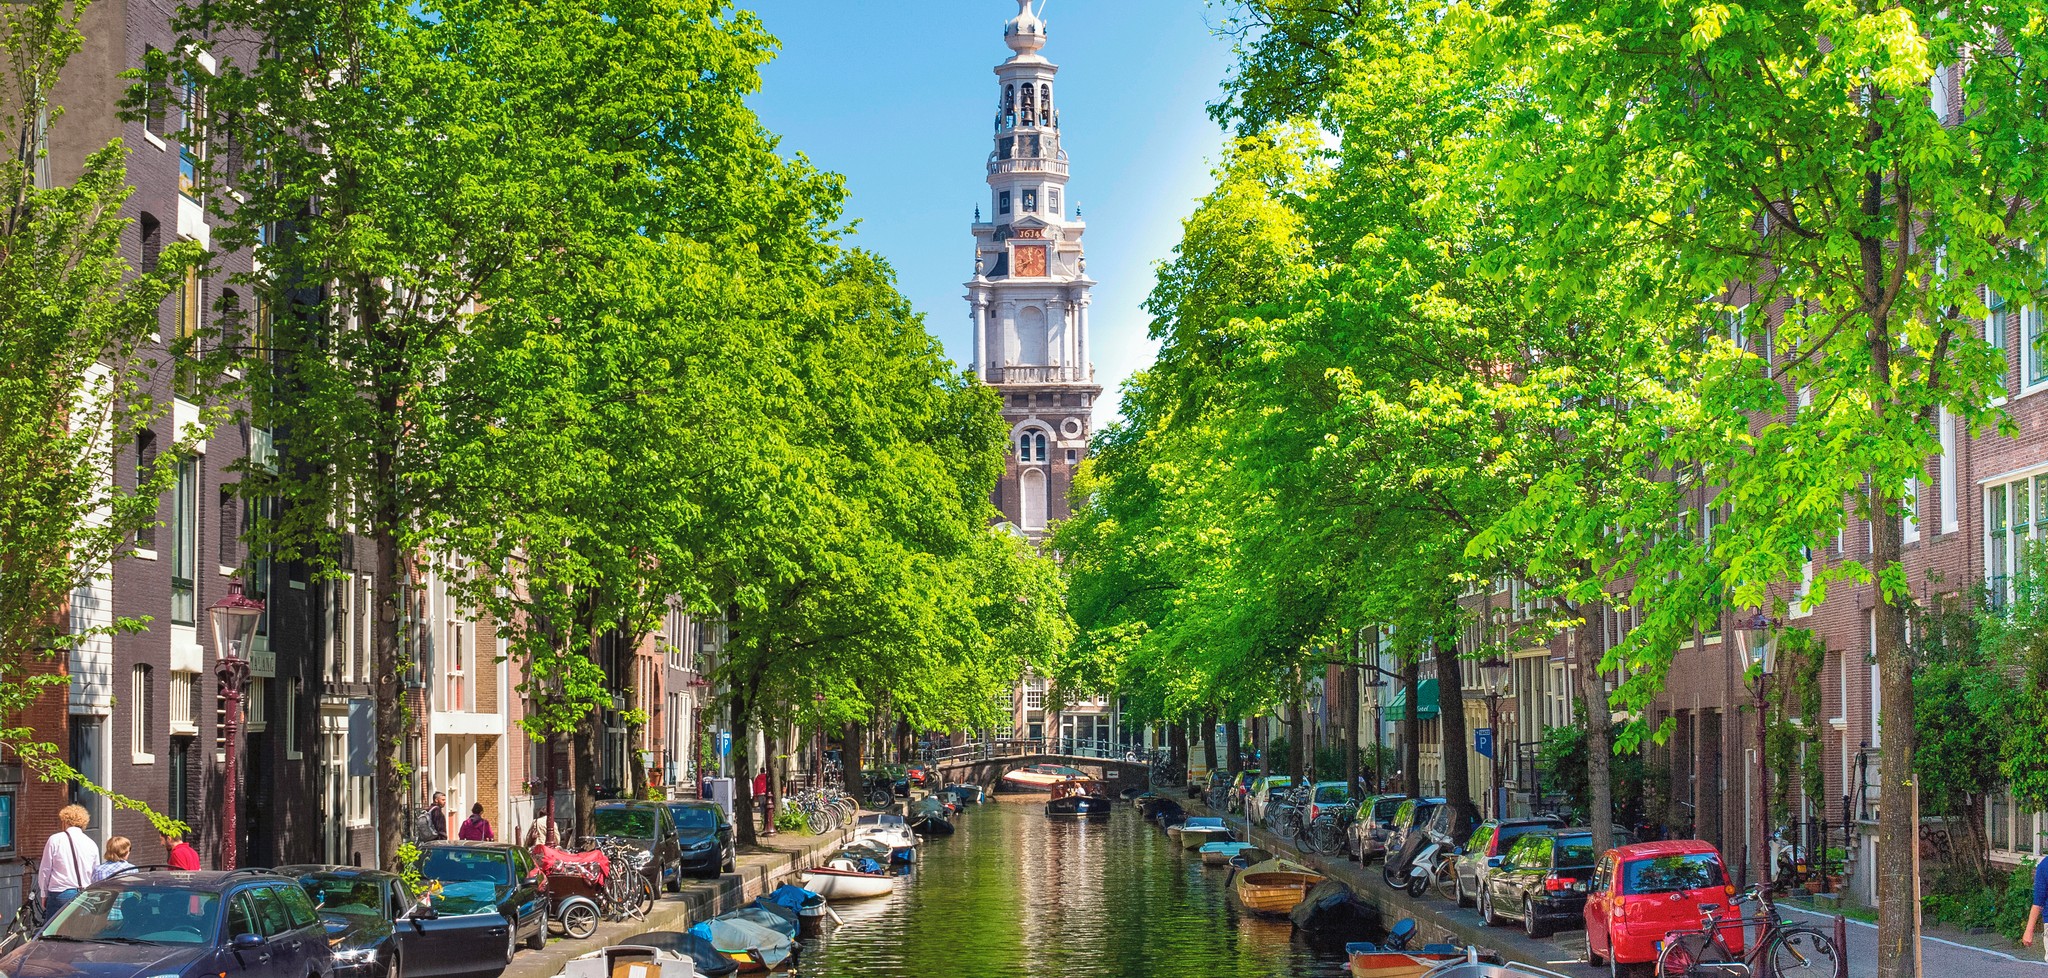 Canals lined with culture